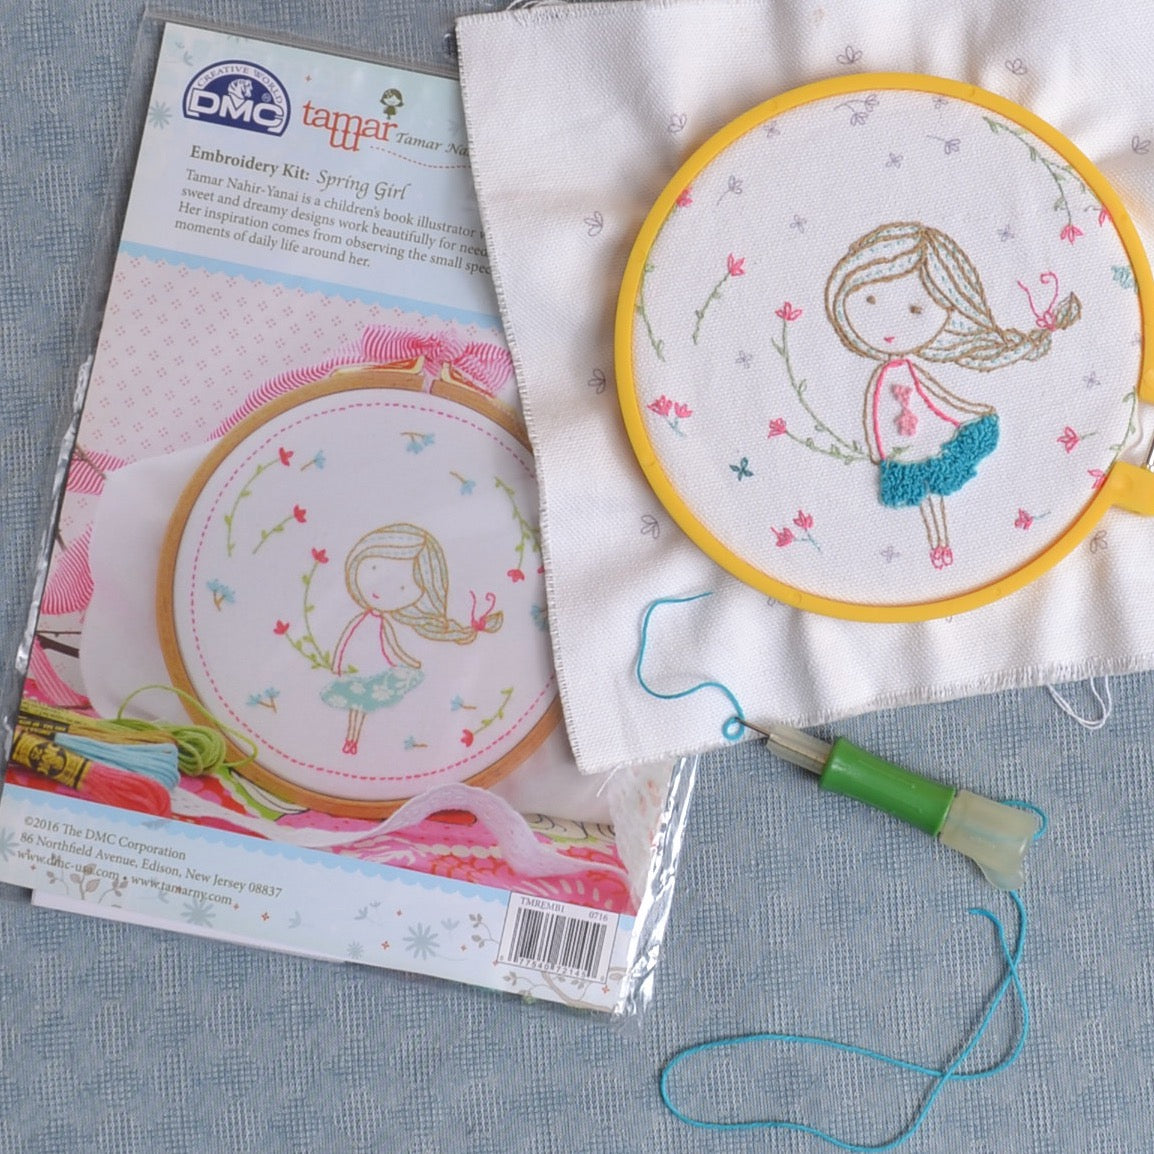 Spring Girl embroidery kit